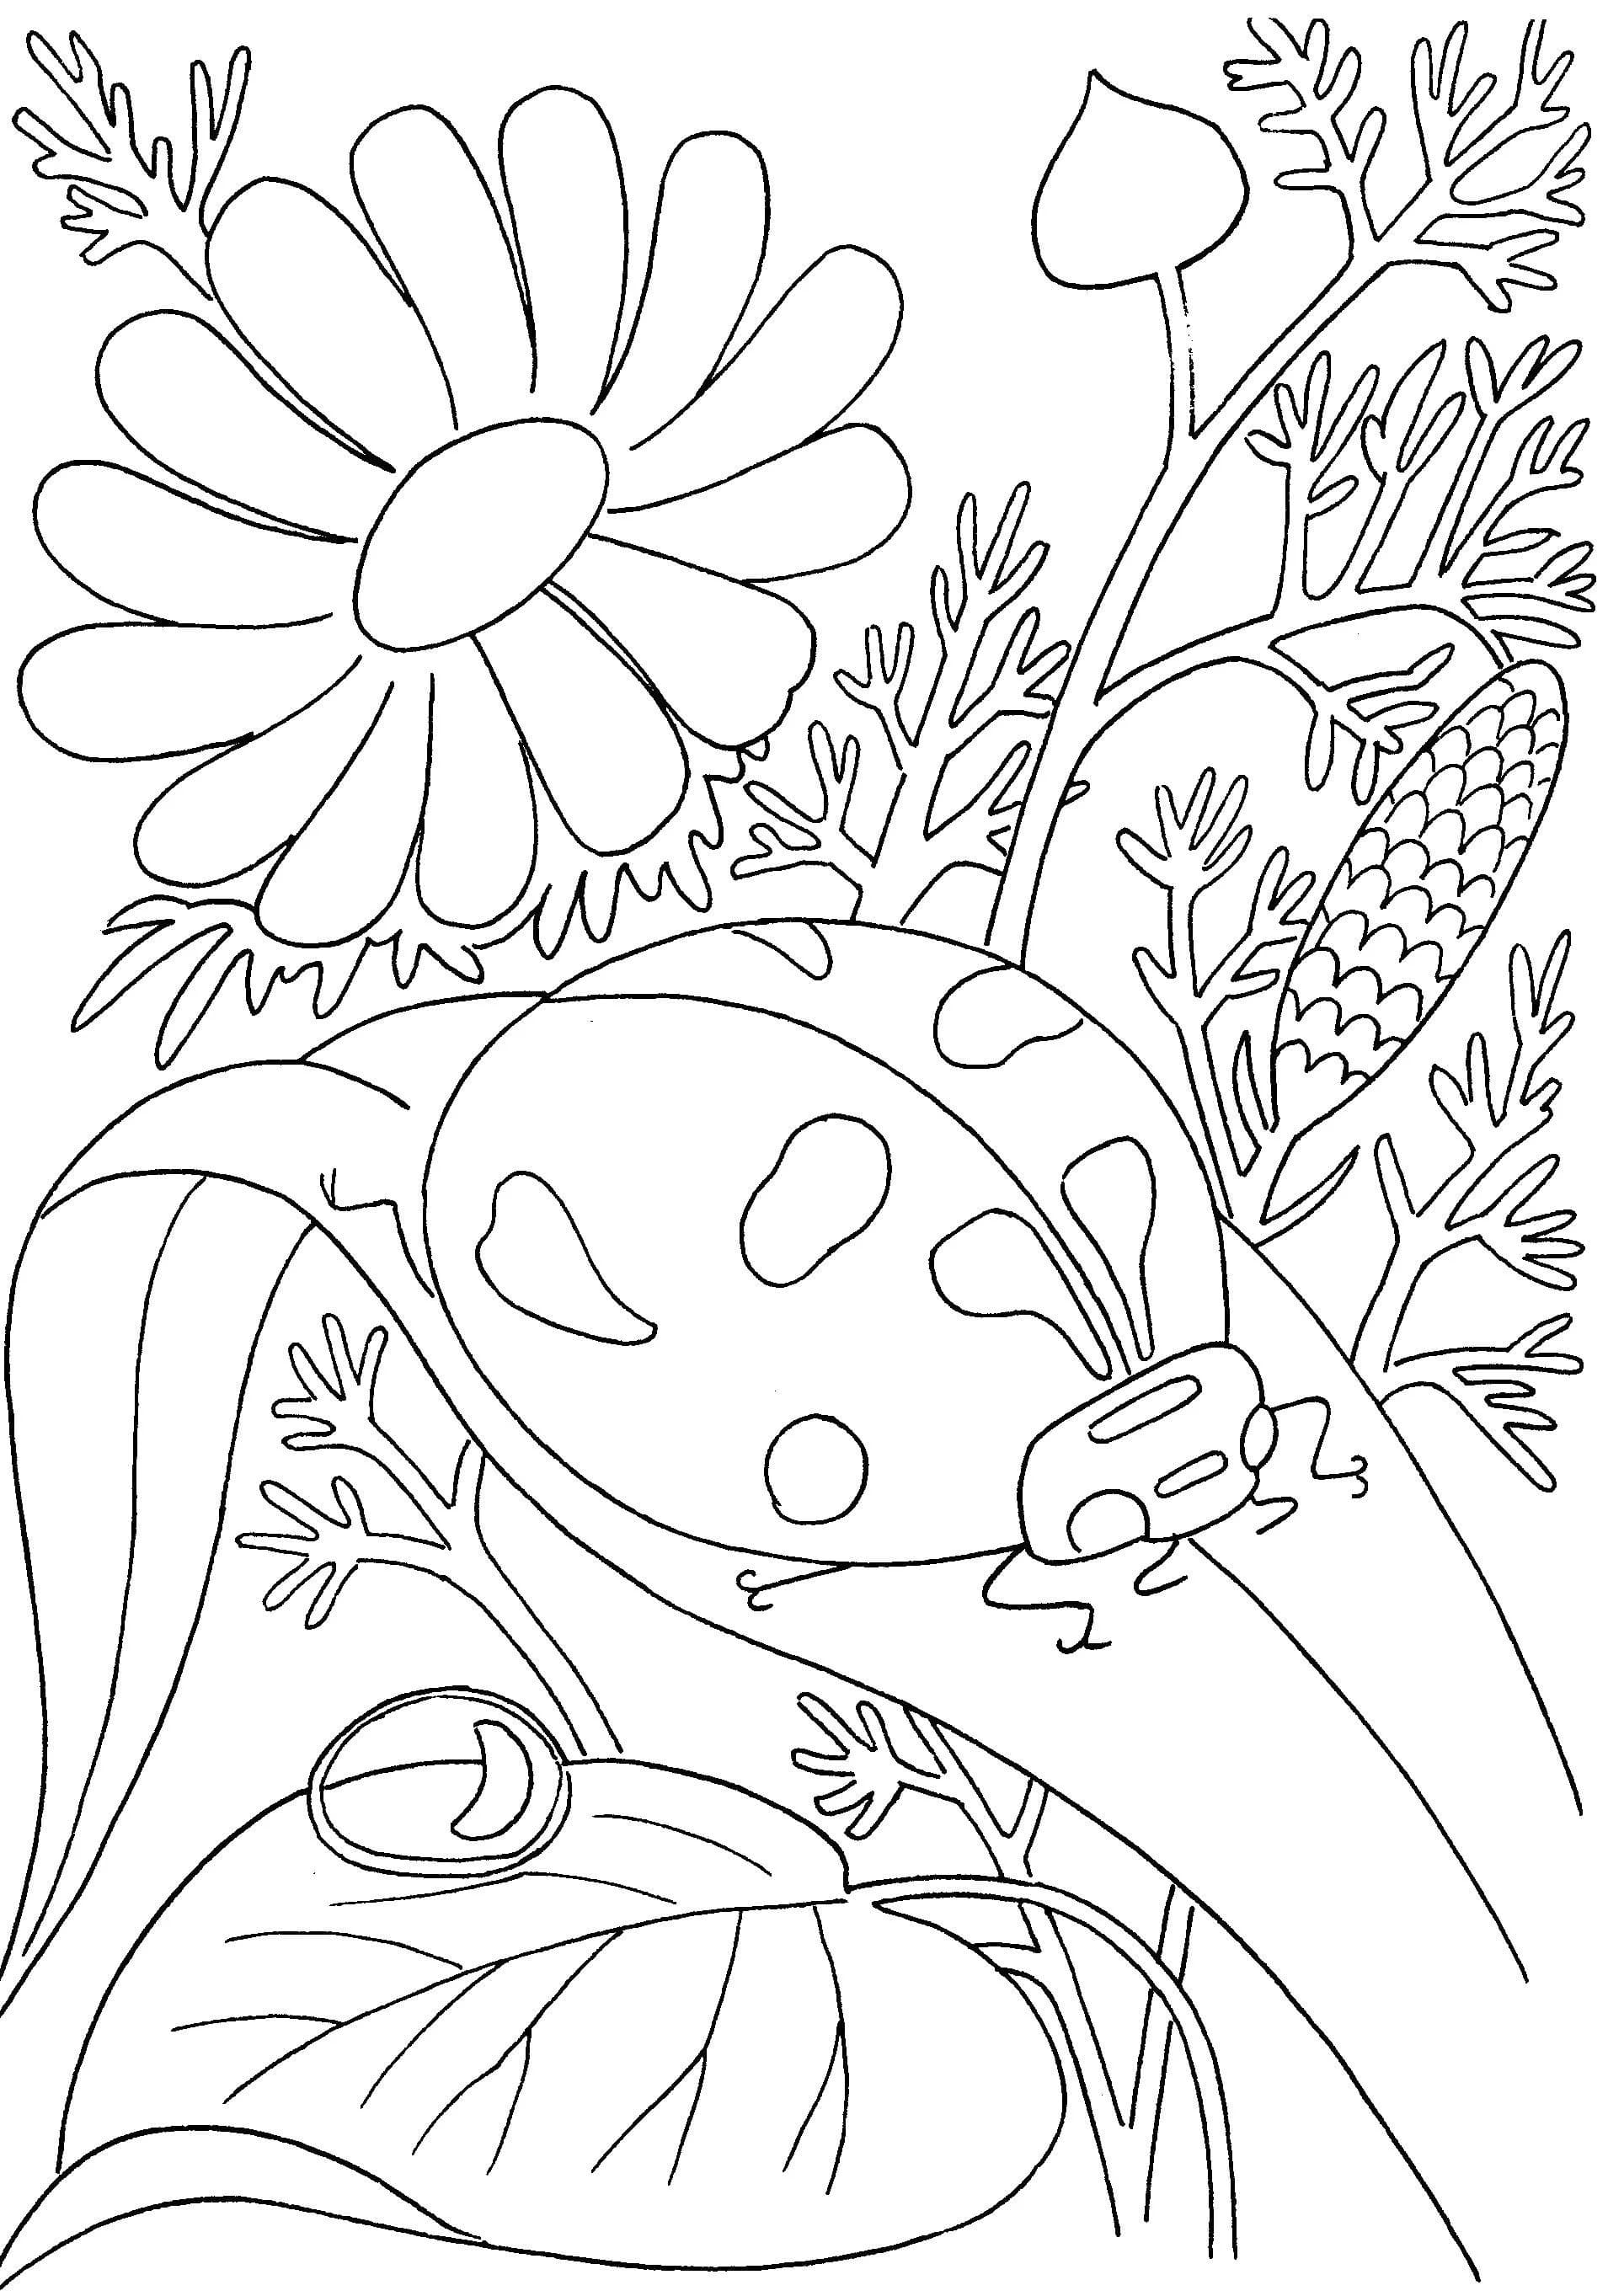 Summer Coloring Pages. 105 Best Images Free Printable